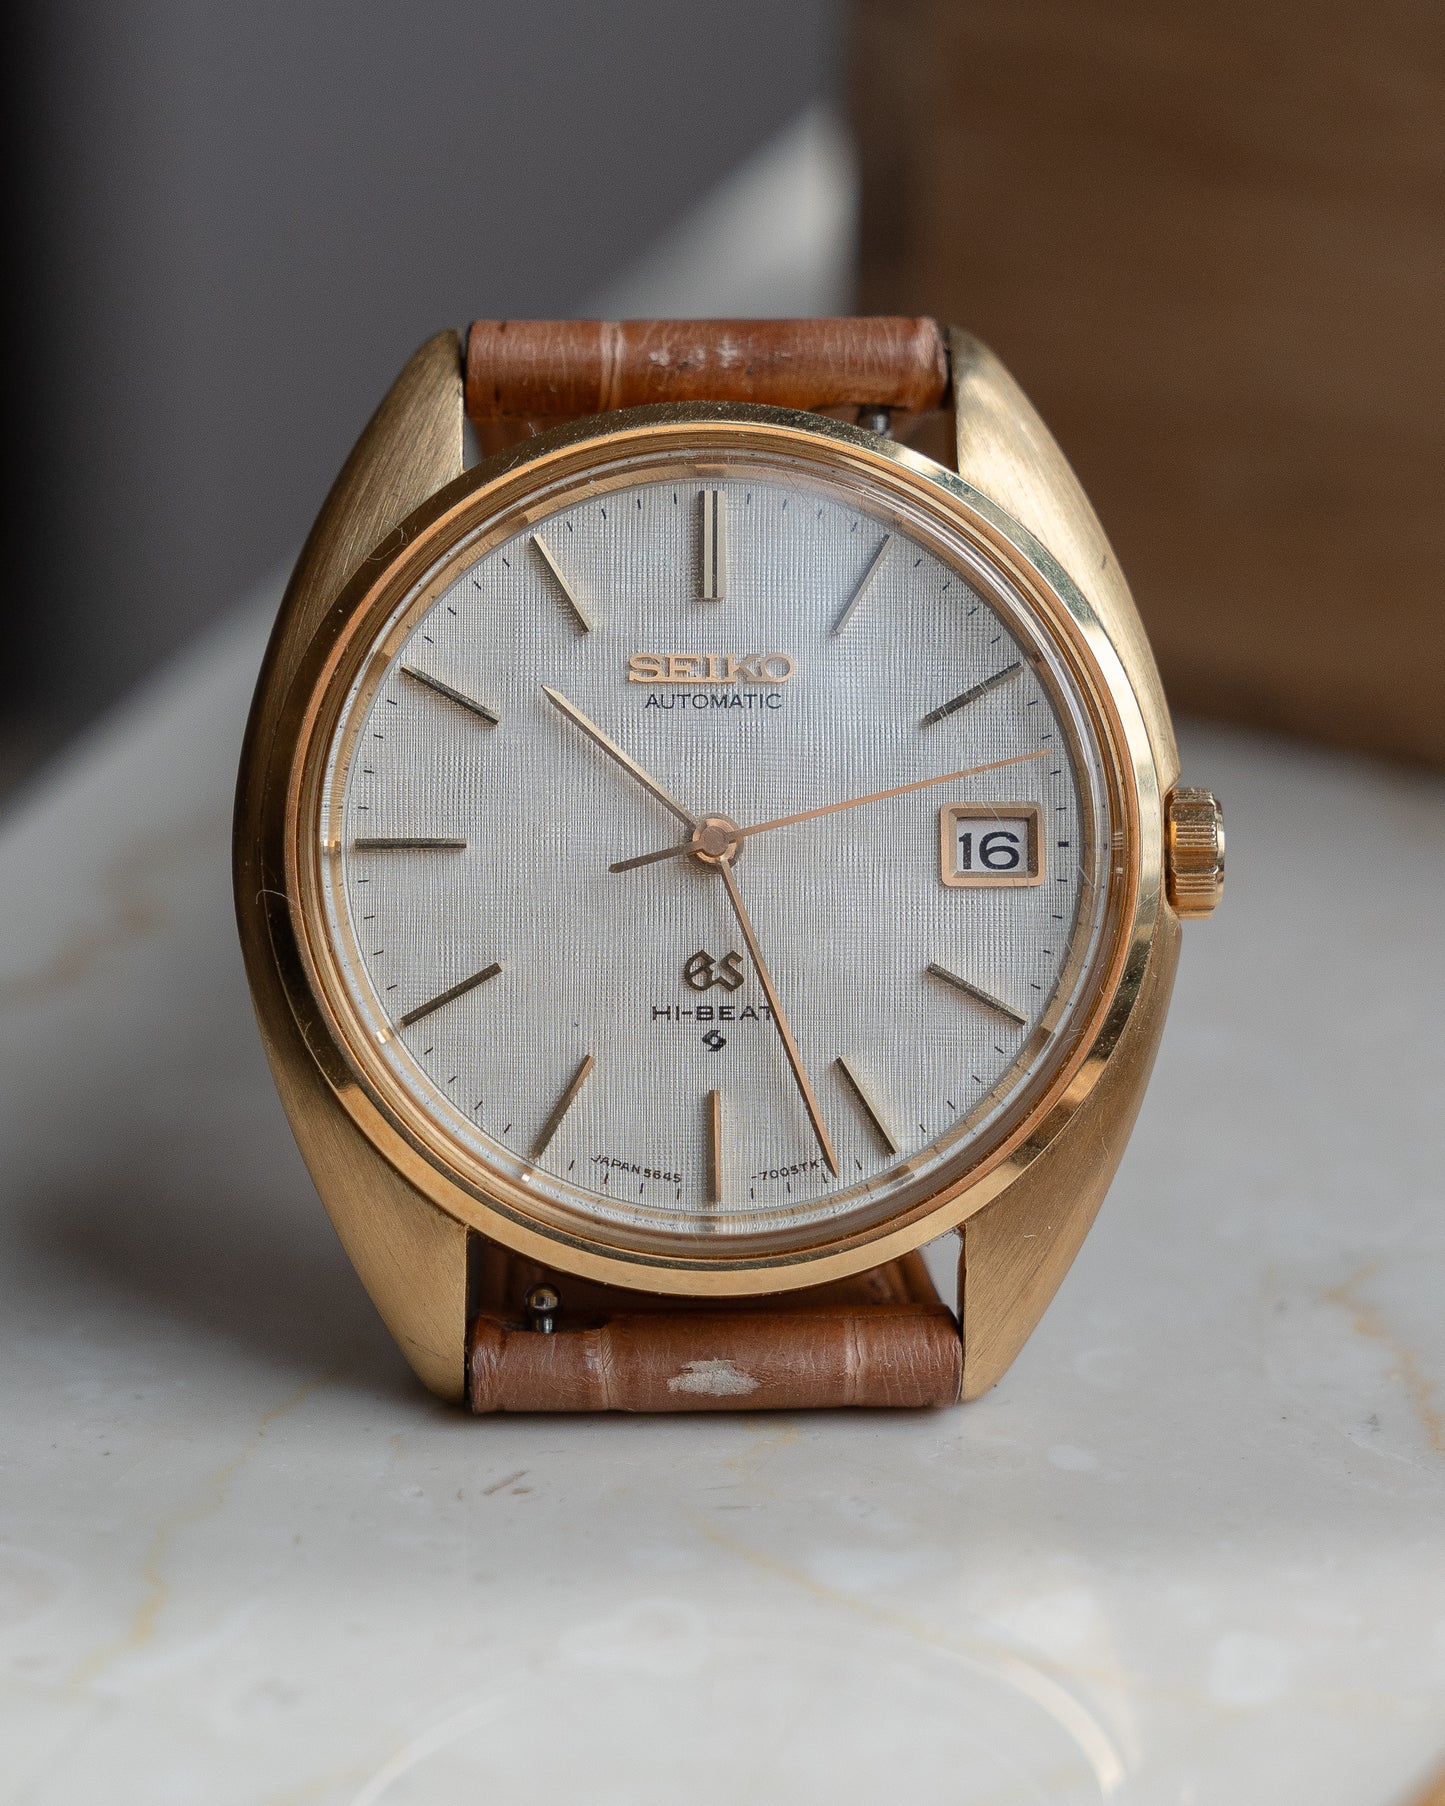 Grand Seiko 5645-7005 linen dial in 18k yellow gold July 1971